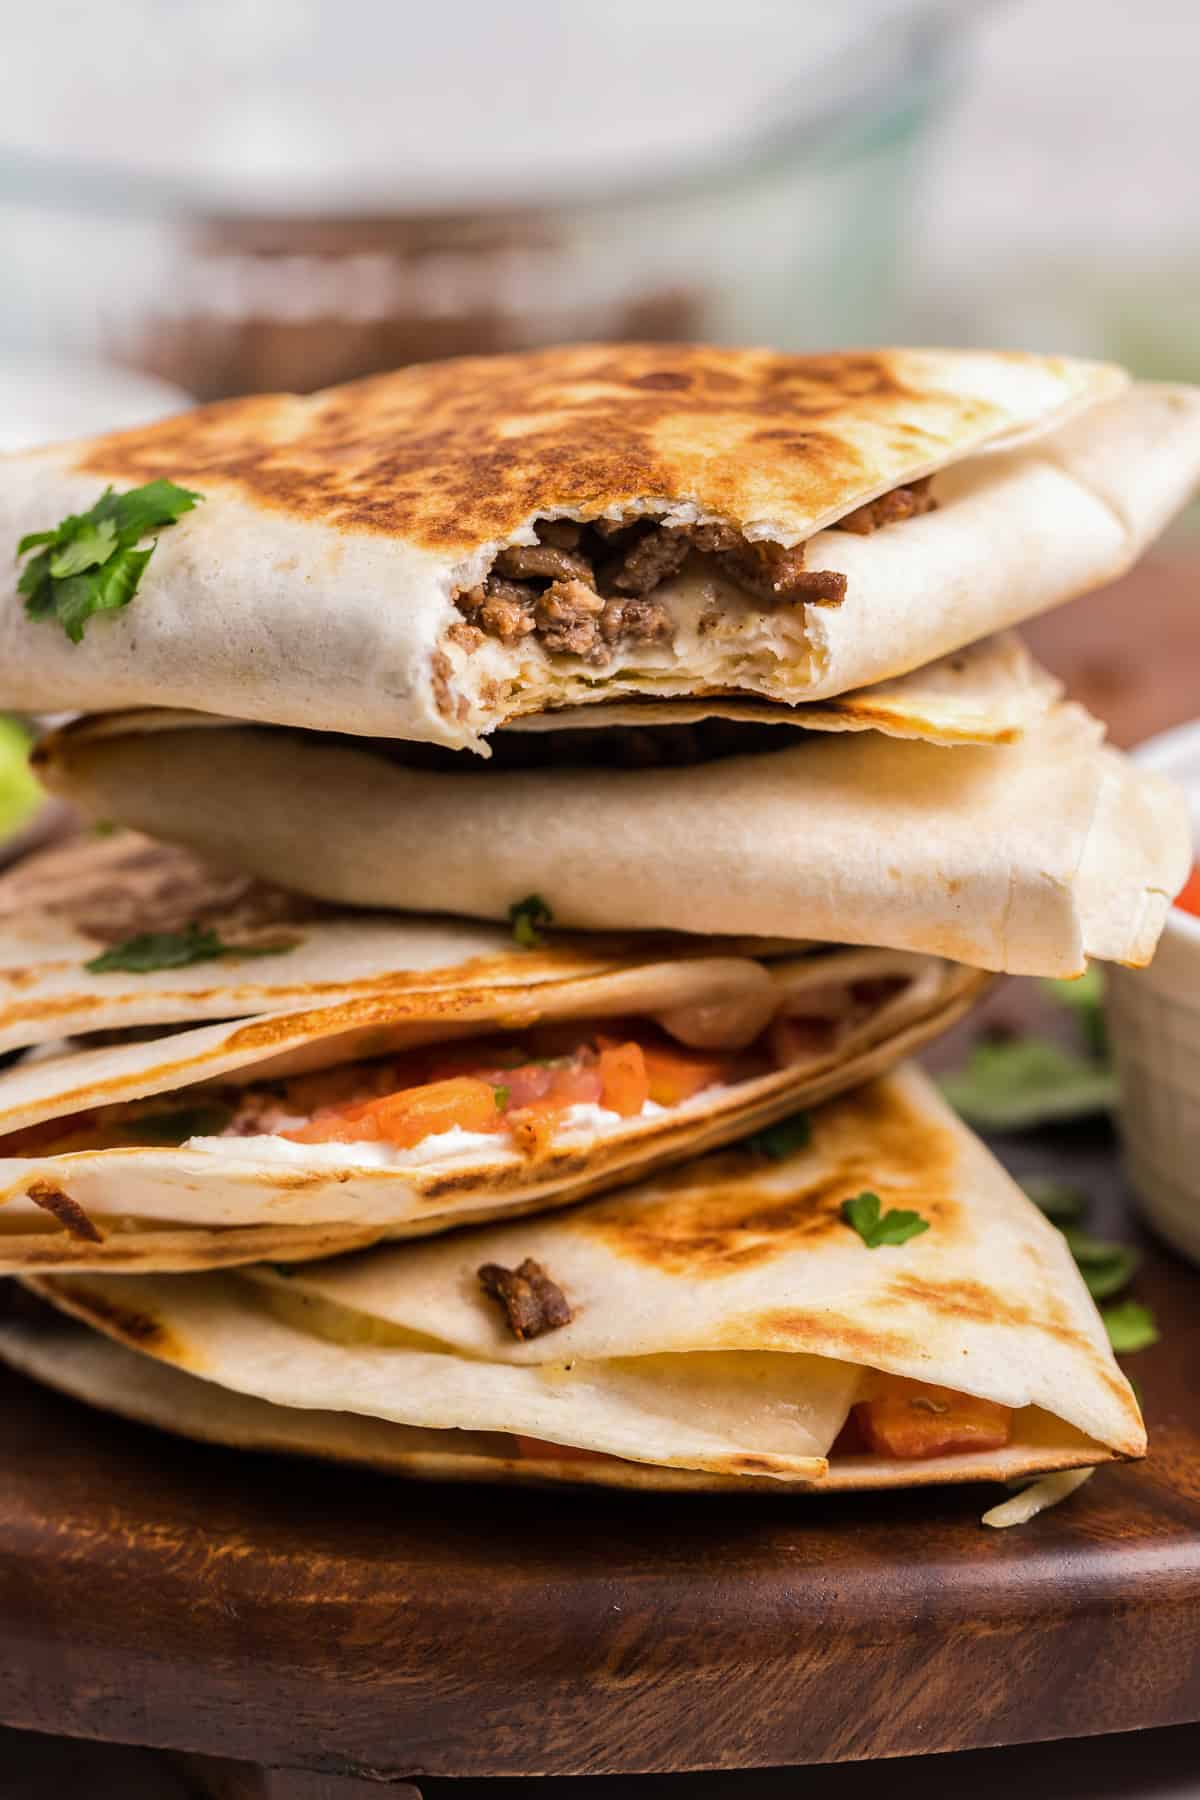 The Best Quesadilla Makers for Tortillas Bursting With Meat and Cheese